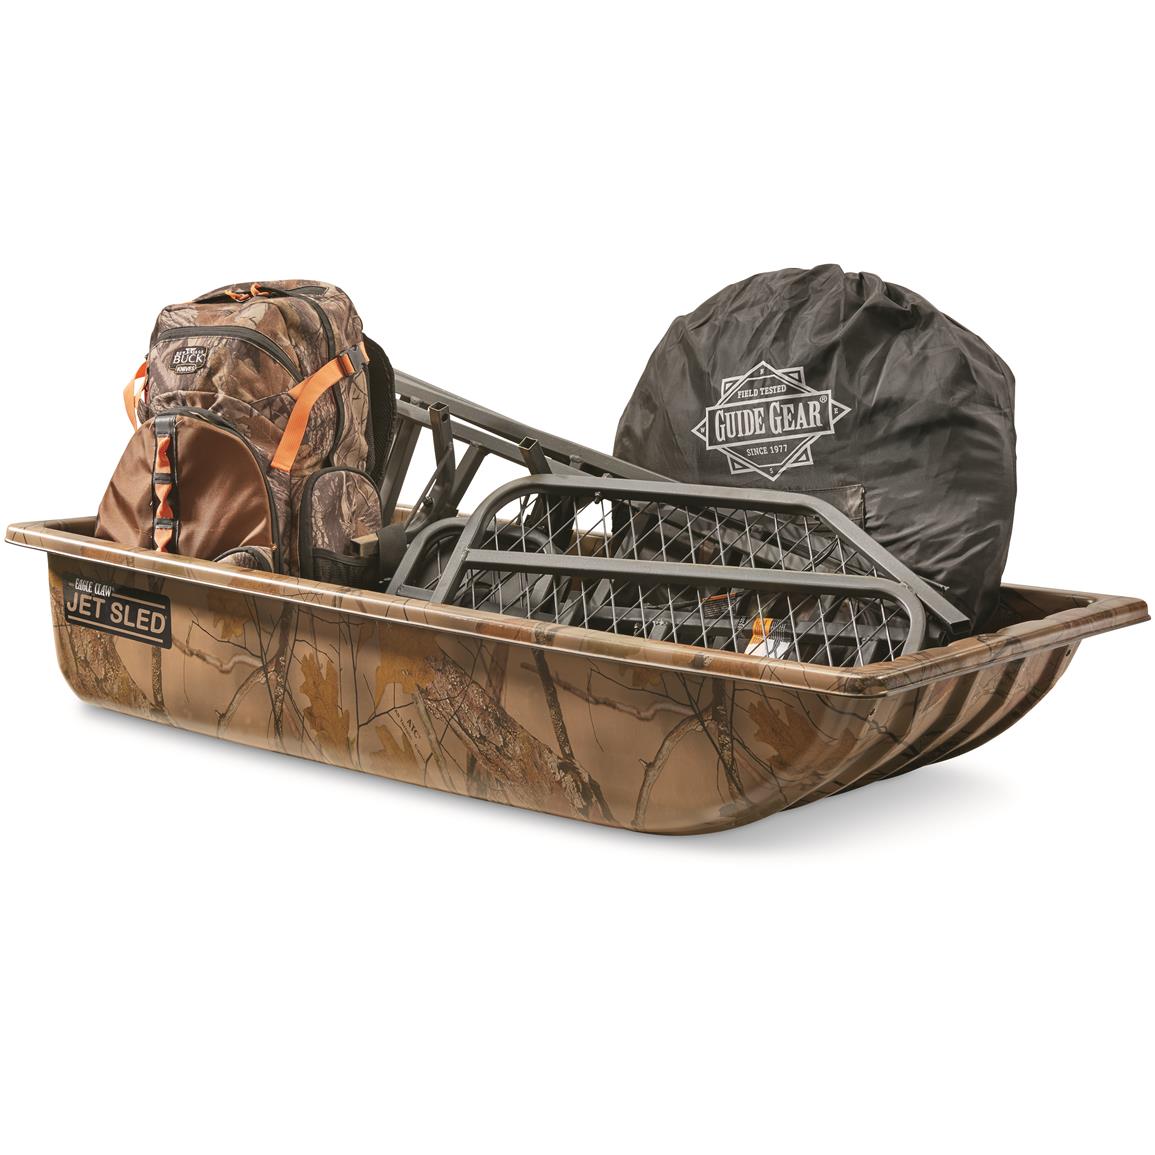 Shappell Camo Jet Sled 1 with SWB3 Sled Wear Bars